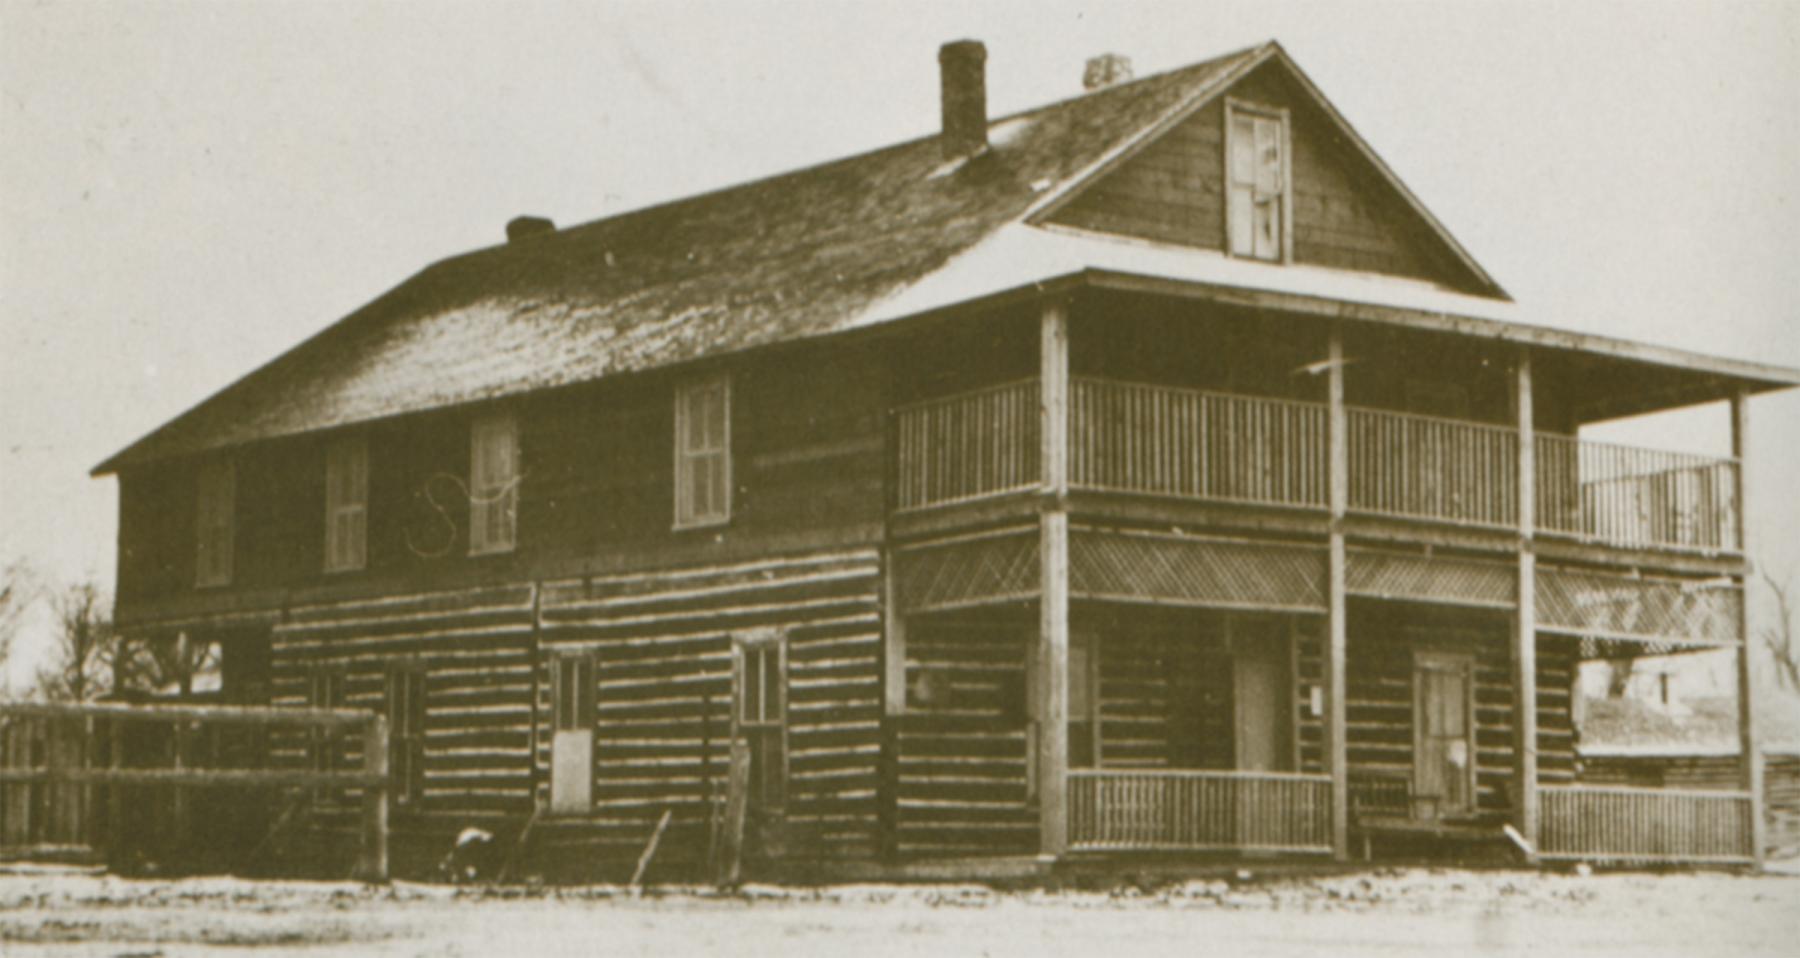 The Stage Stop on the Little Laramie River, owned and operated by the Wright family. This second version of the building, built around 1909, included 10 rooms. The first, built earlier, had no rooms for travelers or boarders.  American Heritage Center.